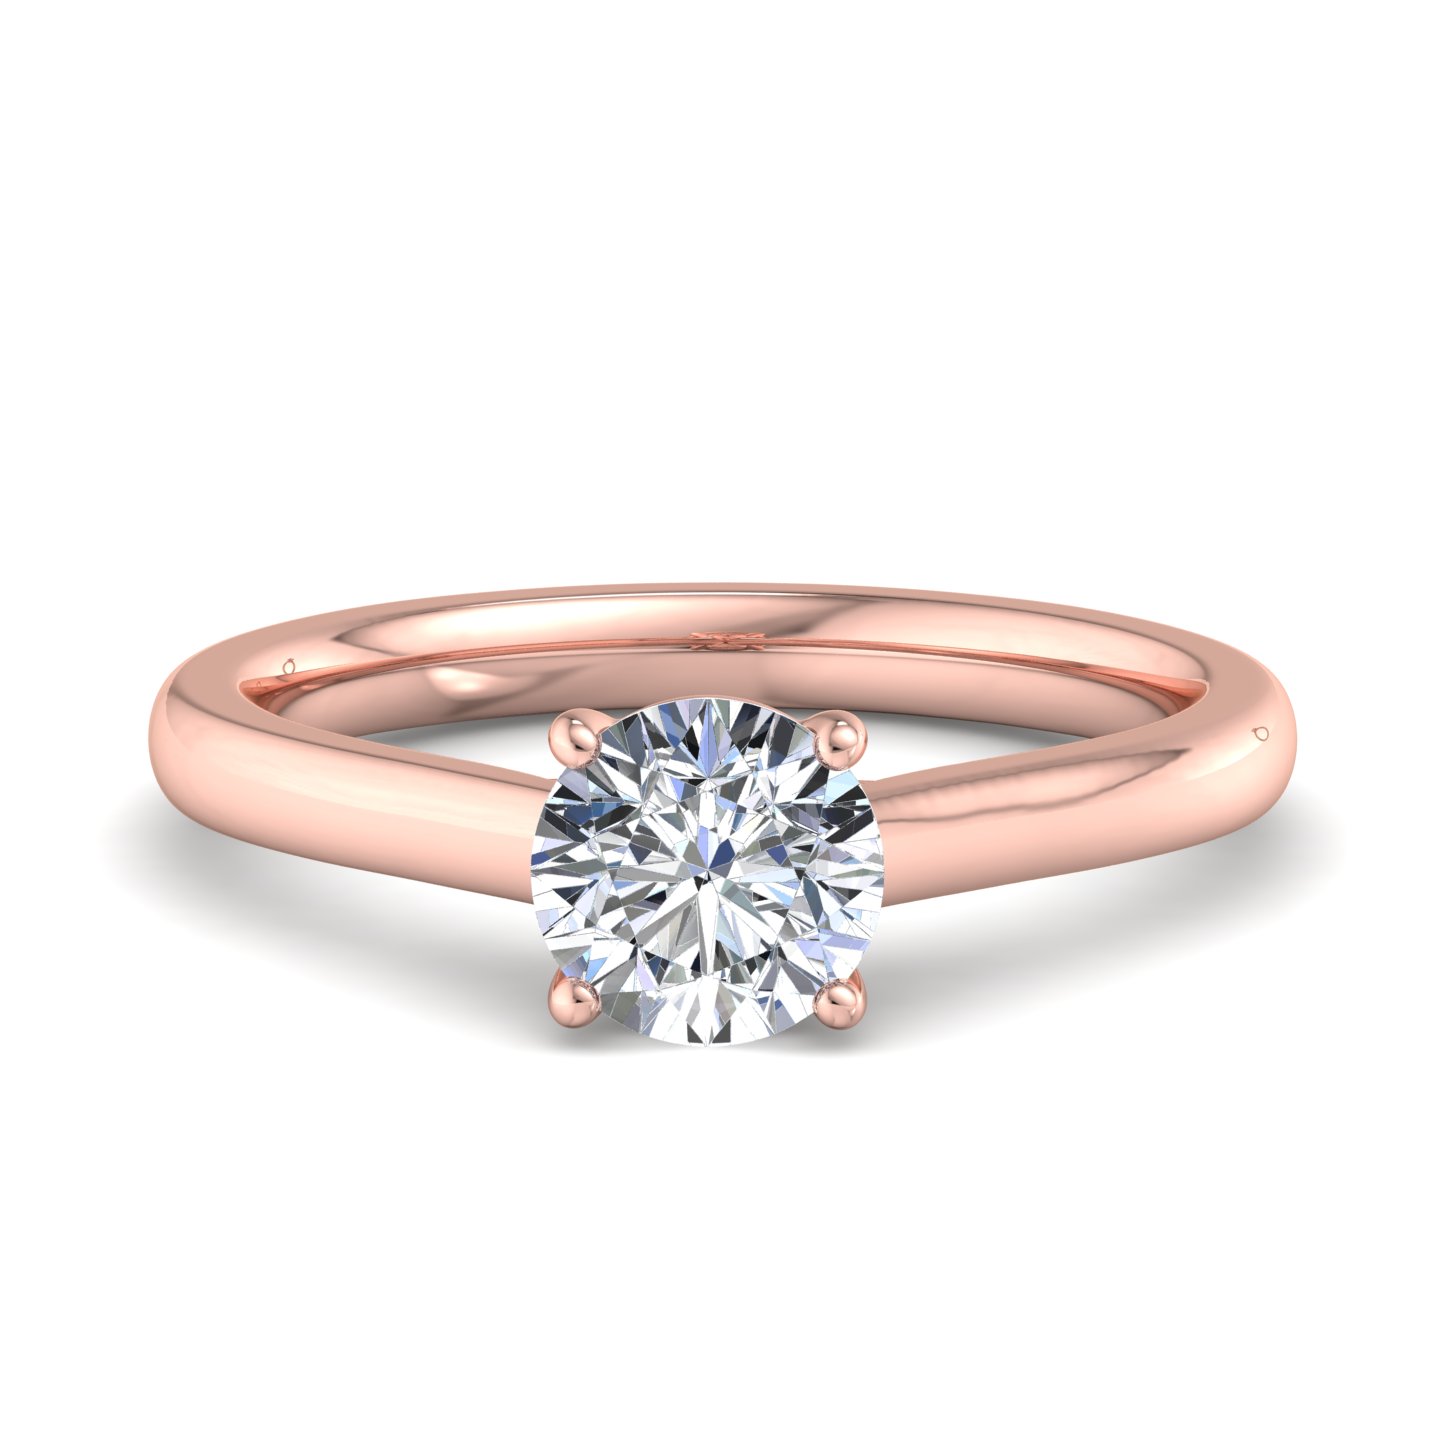 Andrea Solitaire engagement ring